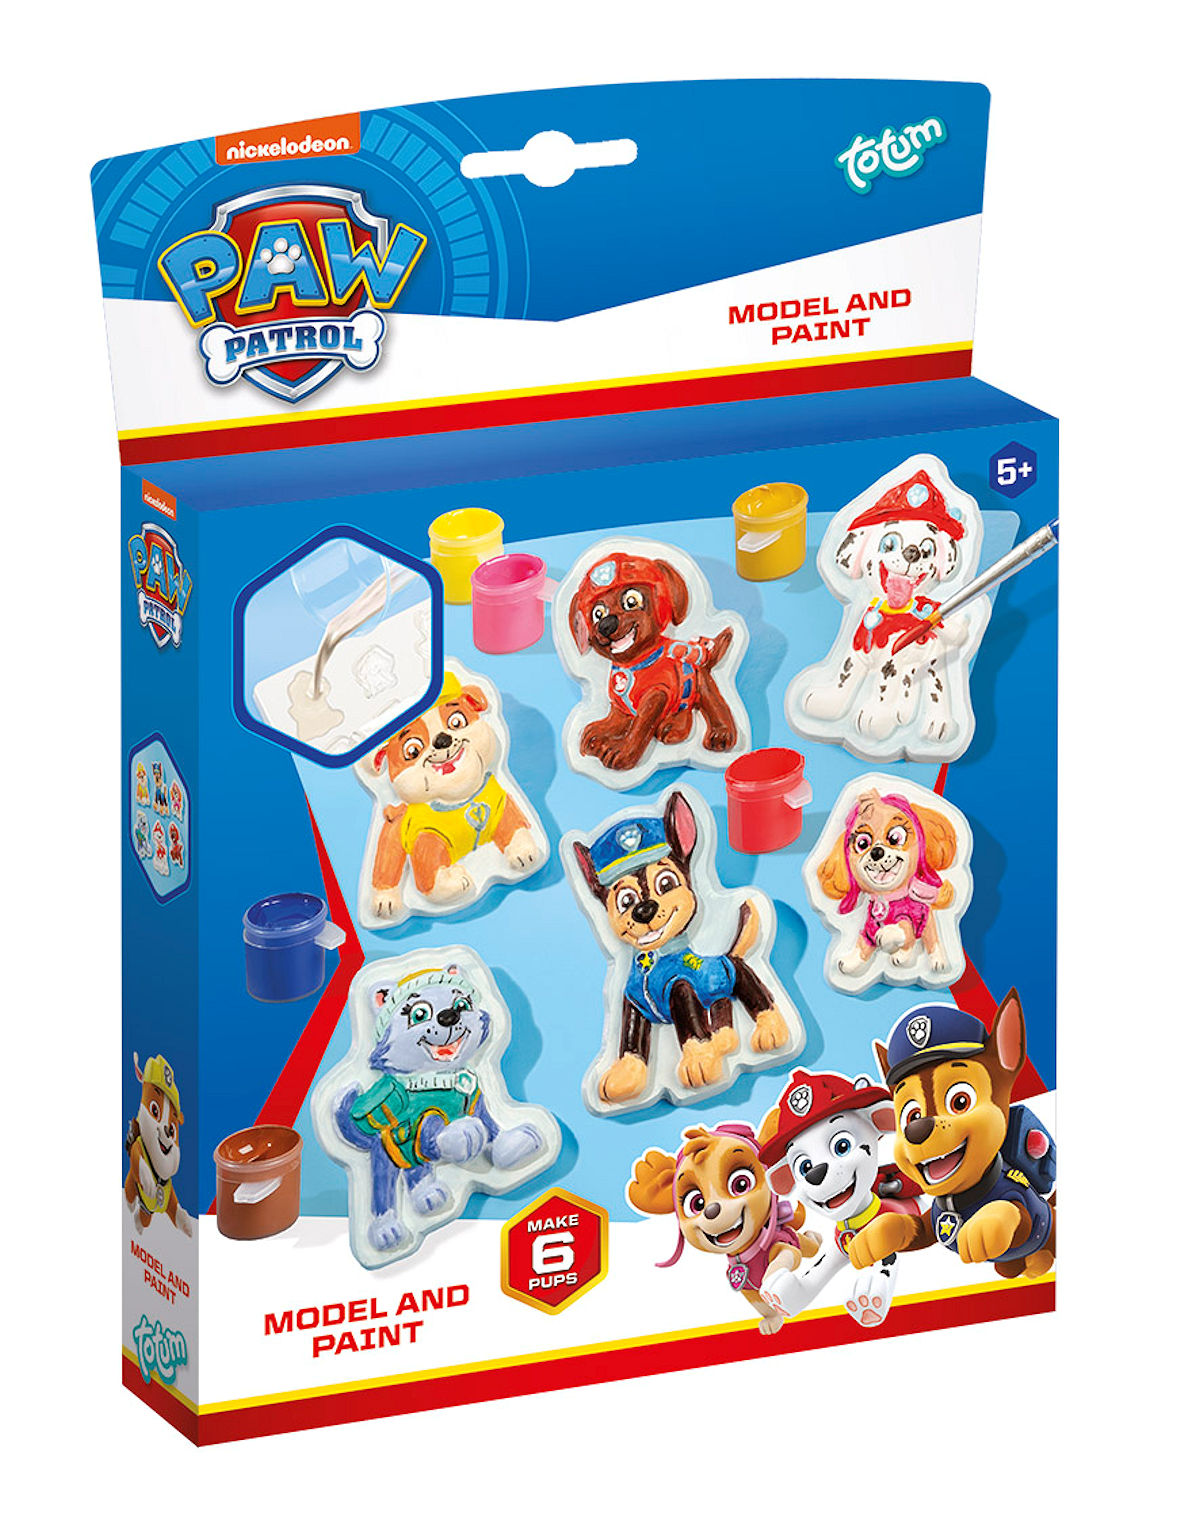 TOTUM PAW PATROL MODEL AND PAINT - 8714274720961 - 532719